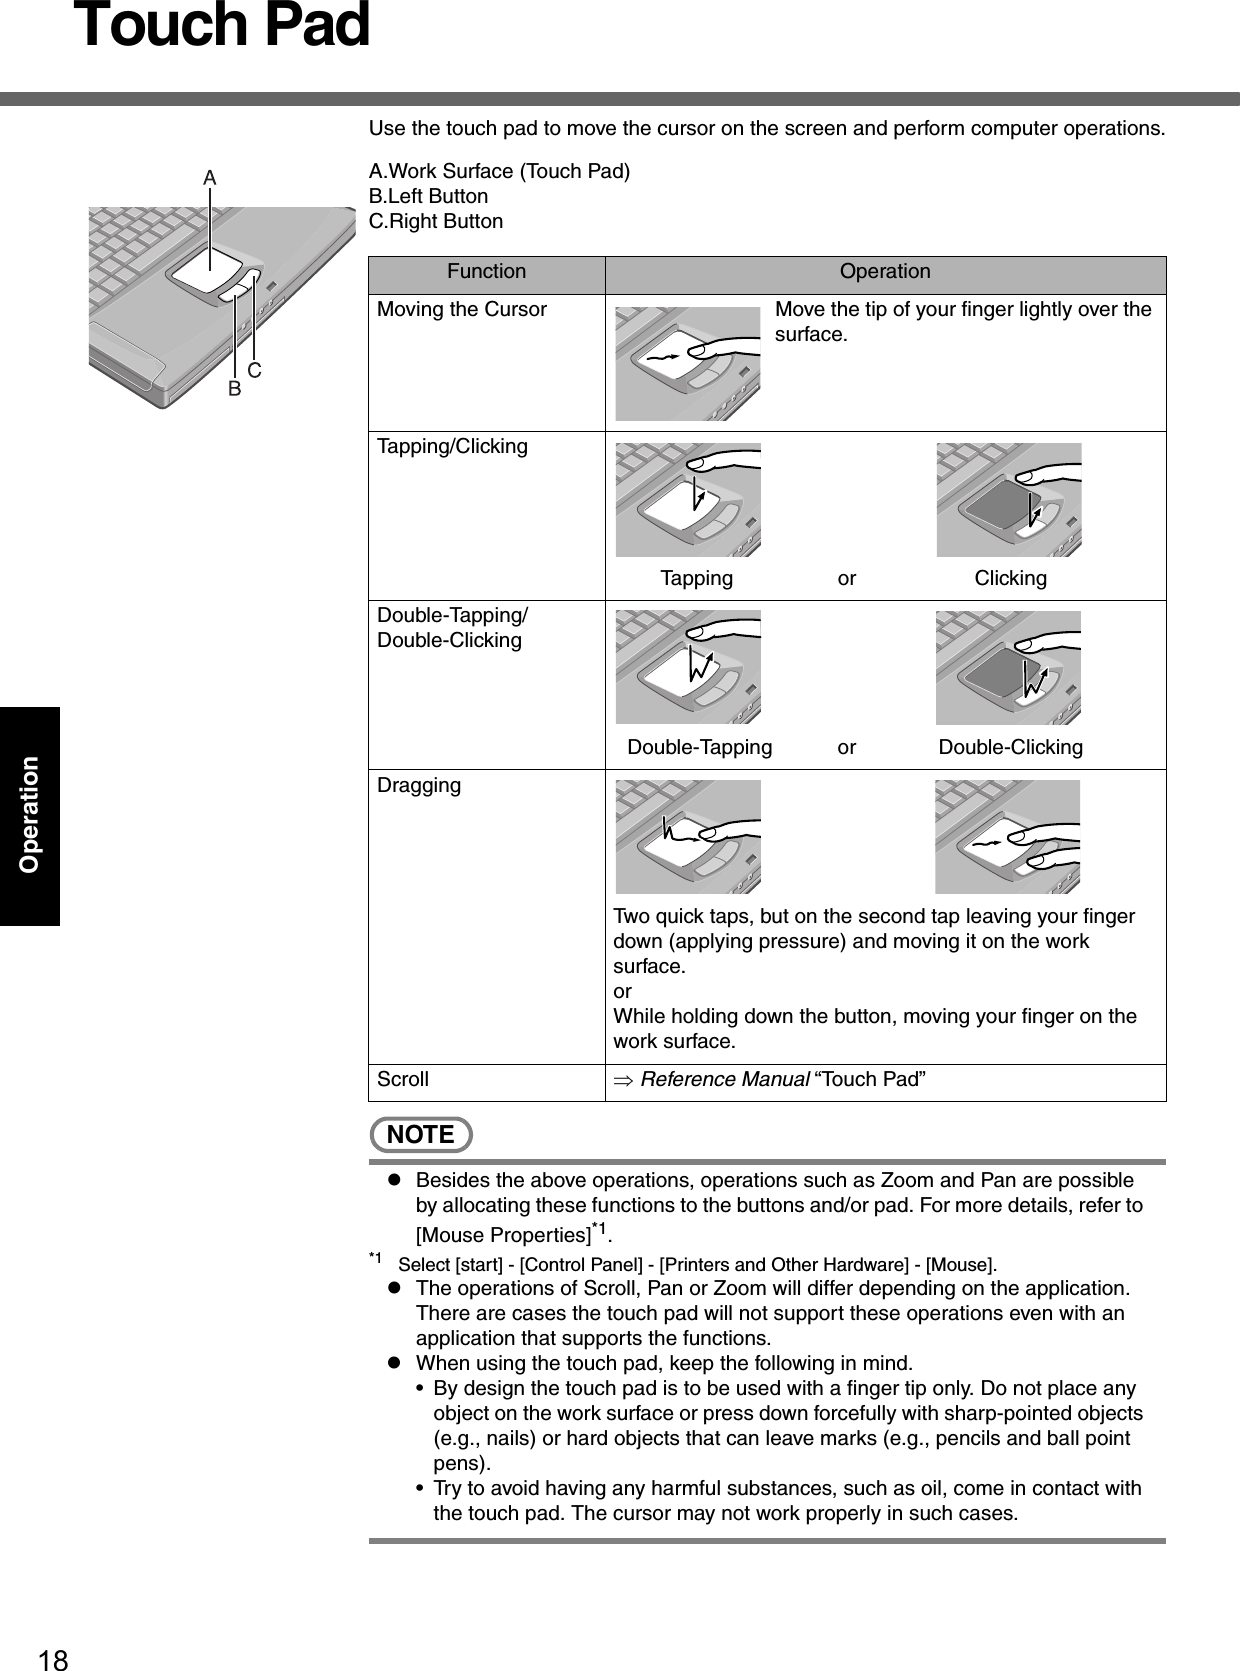 18OperationTouch PadUse the touch pad to move the cursor on the screen and perform computer operations.A.Work Surface (Touch Pad)B.Left ButtonC.Right ButtonNOTEzBesides the above operations, operations such as Zoom and Pan are possible by allocating these functions to the buttons and/or pad. For more details, refer to [Mouse Properties]*1.*1 Select [start] - [Control Panel] - [Printers and Other Hardware] - [Mouse].zThe operations of Scroll, Pan or Zoom will differ depending on the application. There are cases the touch pad will not support these operations even with an application that supports the functions.zWhen using the touch pad, keep the following in mind.• By design the touch pad is to be used with a finger tip only. Do not place any object on the work surface or press down forcefully with sharp-pointed objects (e.g., nails) or hard objects that can leave marks (e.g., pencils and ball point pens).• Try to avoid having any harmful substances, such as oil, come in contact with the touch pad. The cursor may not work properly in such cases.Function OperationMoving the Cursor Move the tip of your finger lightly over the surface.Tapping/ClickingTapping or ClickingDouble-Tapping/Double-ClickingDouble-Tapping or Double-ClickingDraggingTwo quick taps, but on the second tap leaving your finger down (applying pressure) and moving it on the work surface.orWhile holding down the button, moving your finger on the work surface.Scroll ⇒ Reference Manual “Touch Pad”